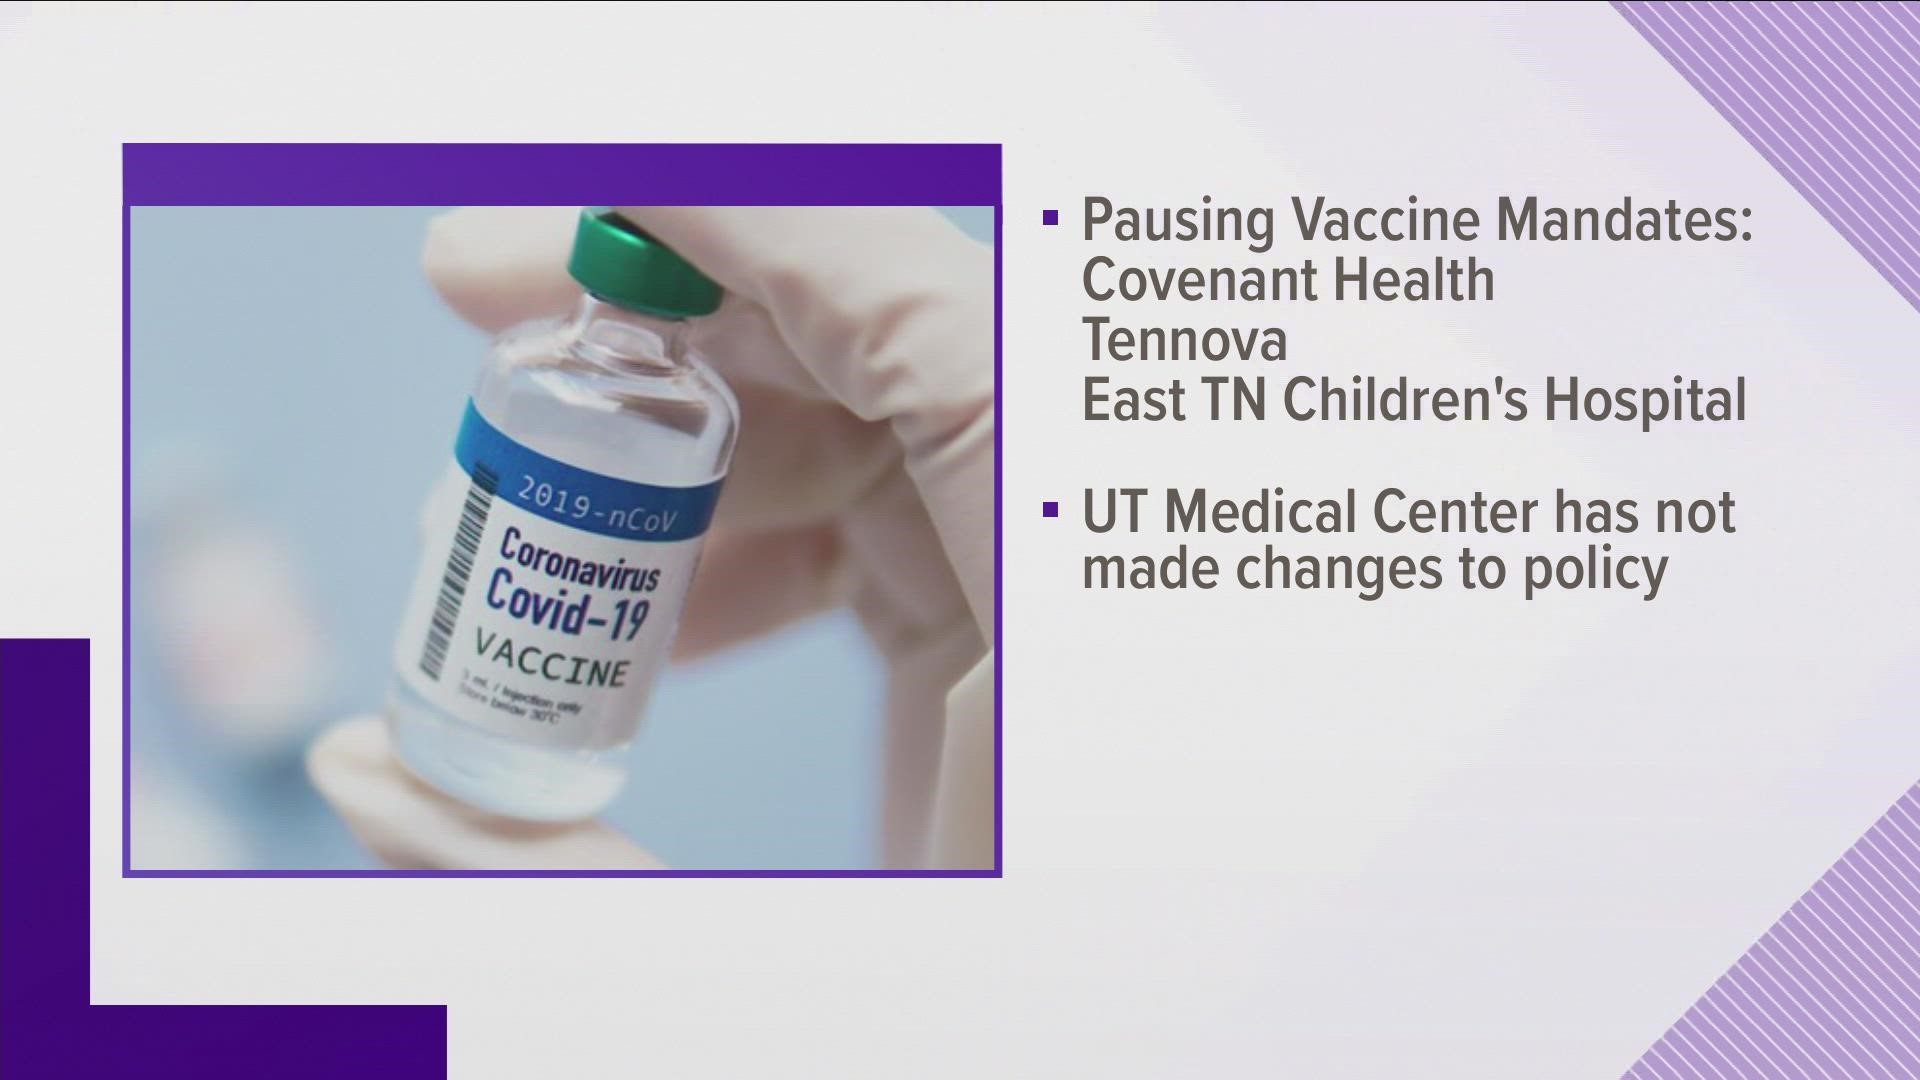 Thee East Tennessee hospitals are pausing their vaccine mandates for staff after another federal judge's ruling in Louisiana.